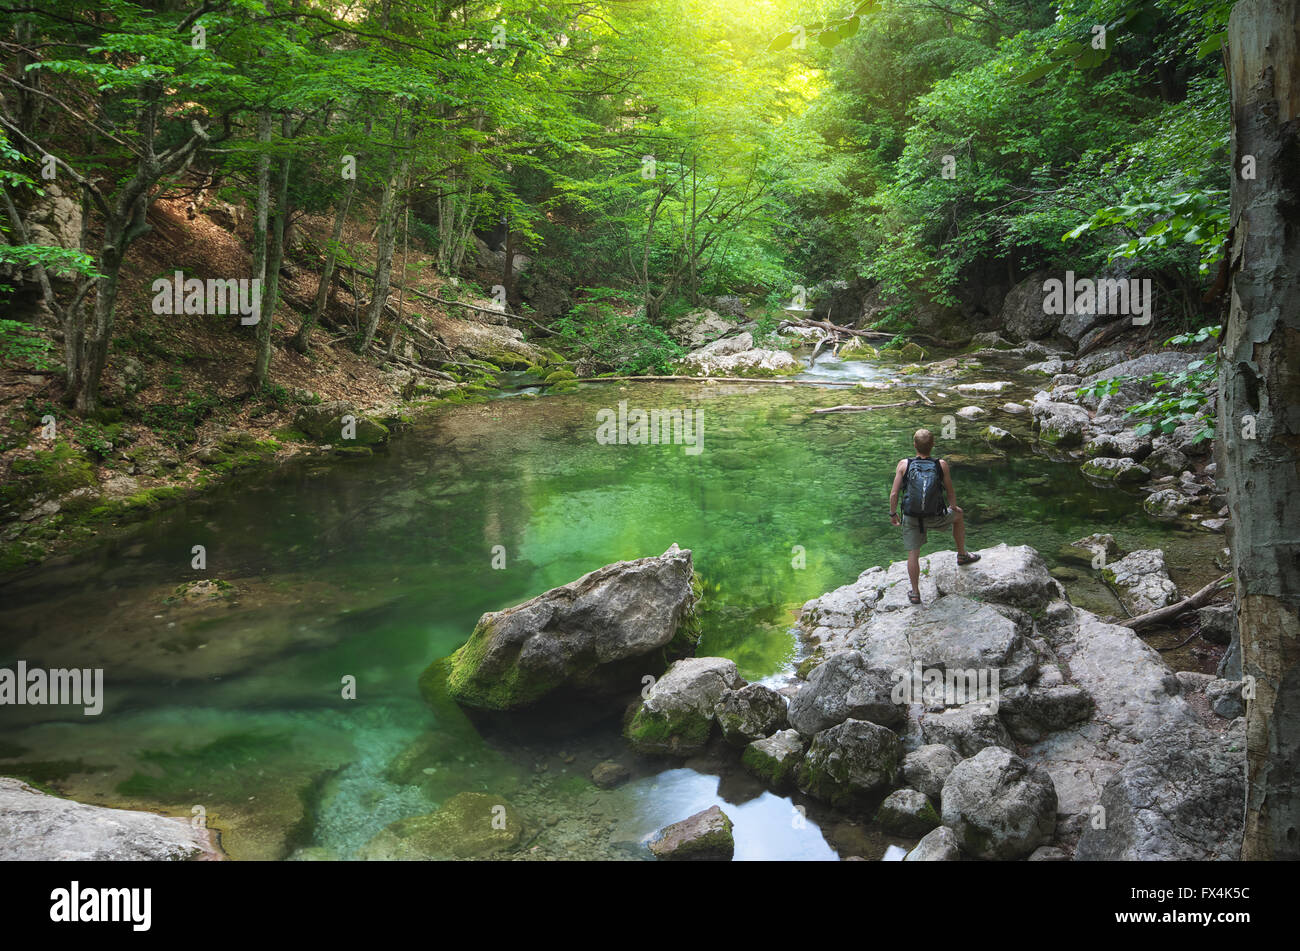 Man into canyon. Spring lake and green forest. Nature composition. Stock Photo